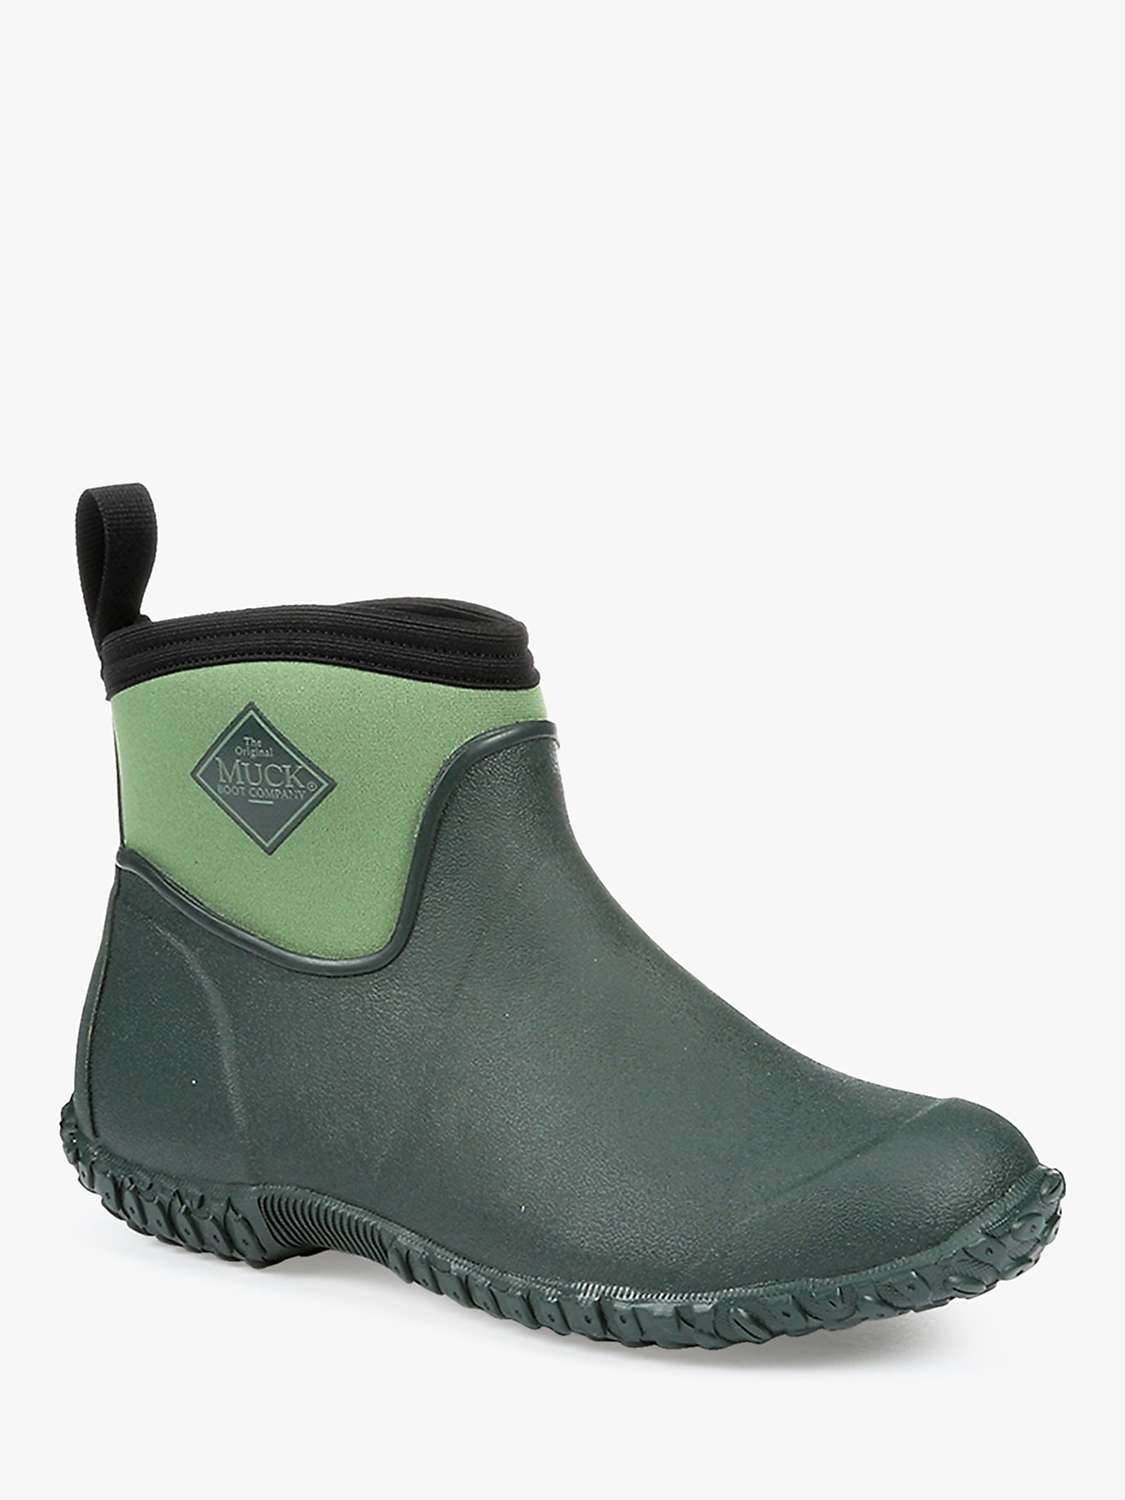 Buy Muck Muckster II Ankle Wellington Boots, Green Online at johnlewis.com